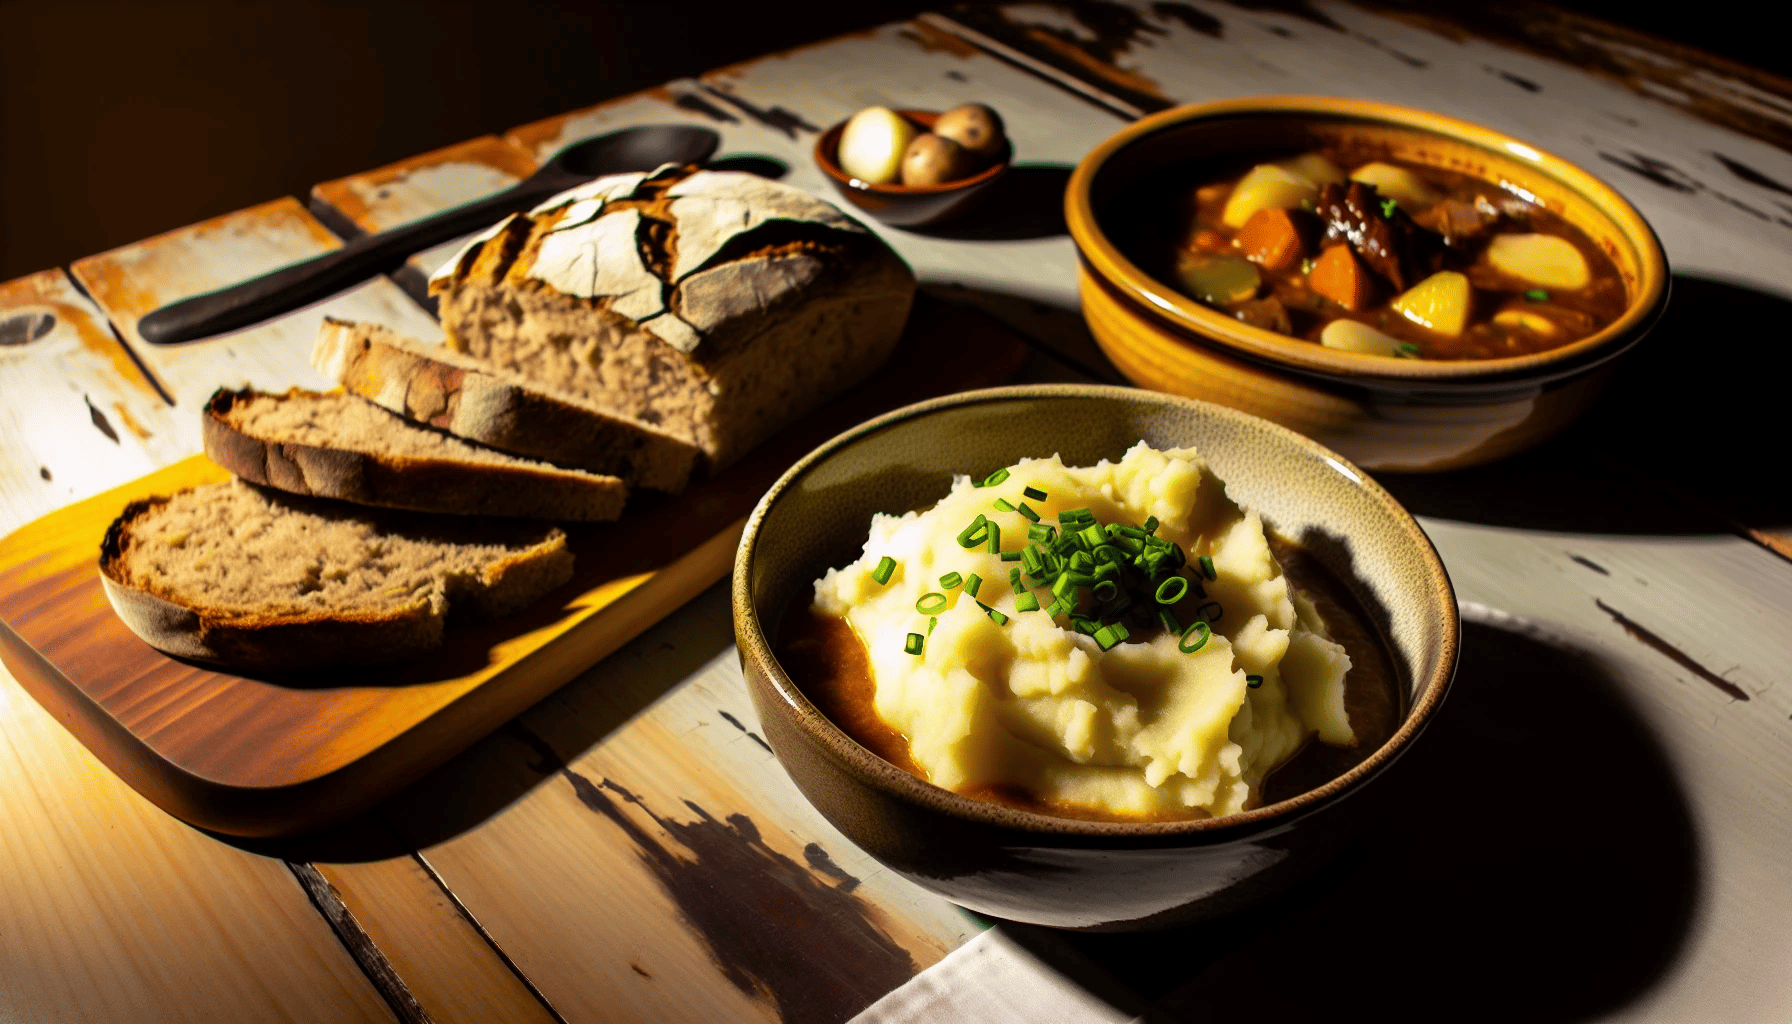 A spread of traditional Irish foods including soda bread, mashed potatoes, and Irish stew